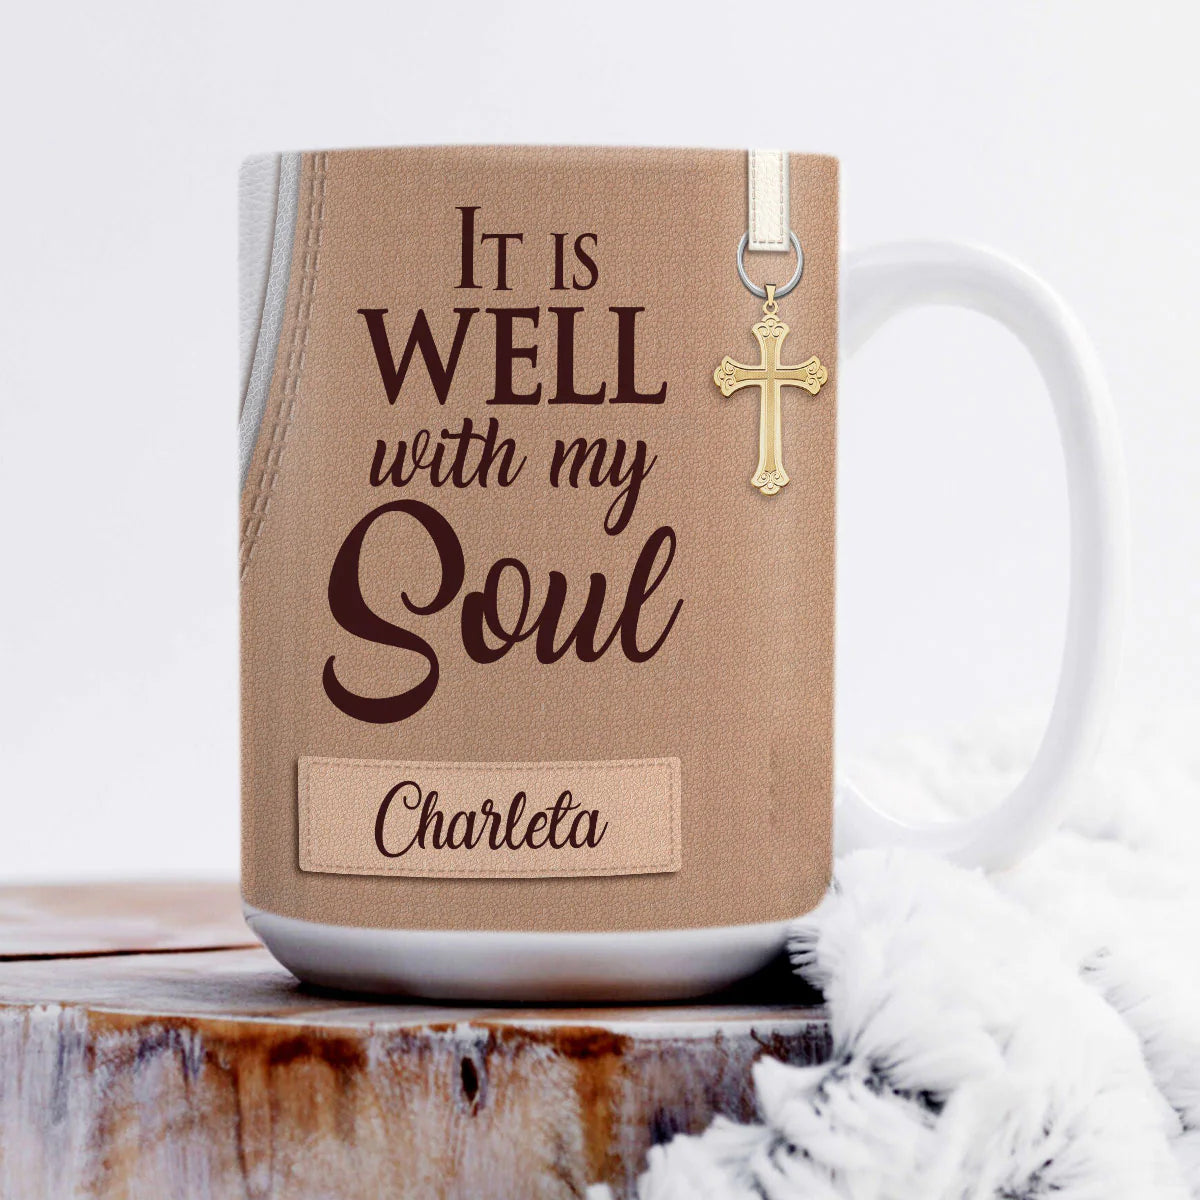 Christianartbag Drinkware, It Is Well With My Soul, Personalized Mug, Tumbler, Personalized Gift. - Christian Art Bag